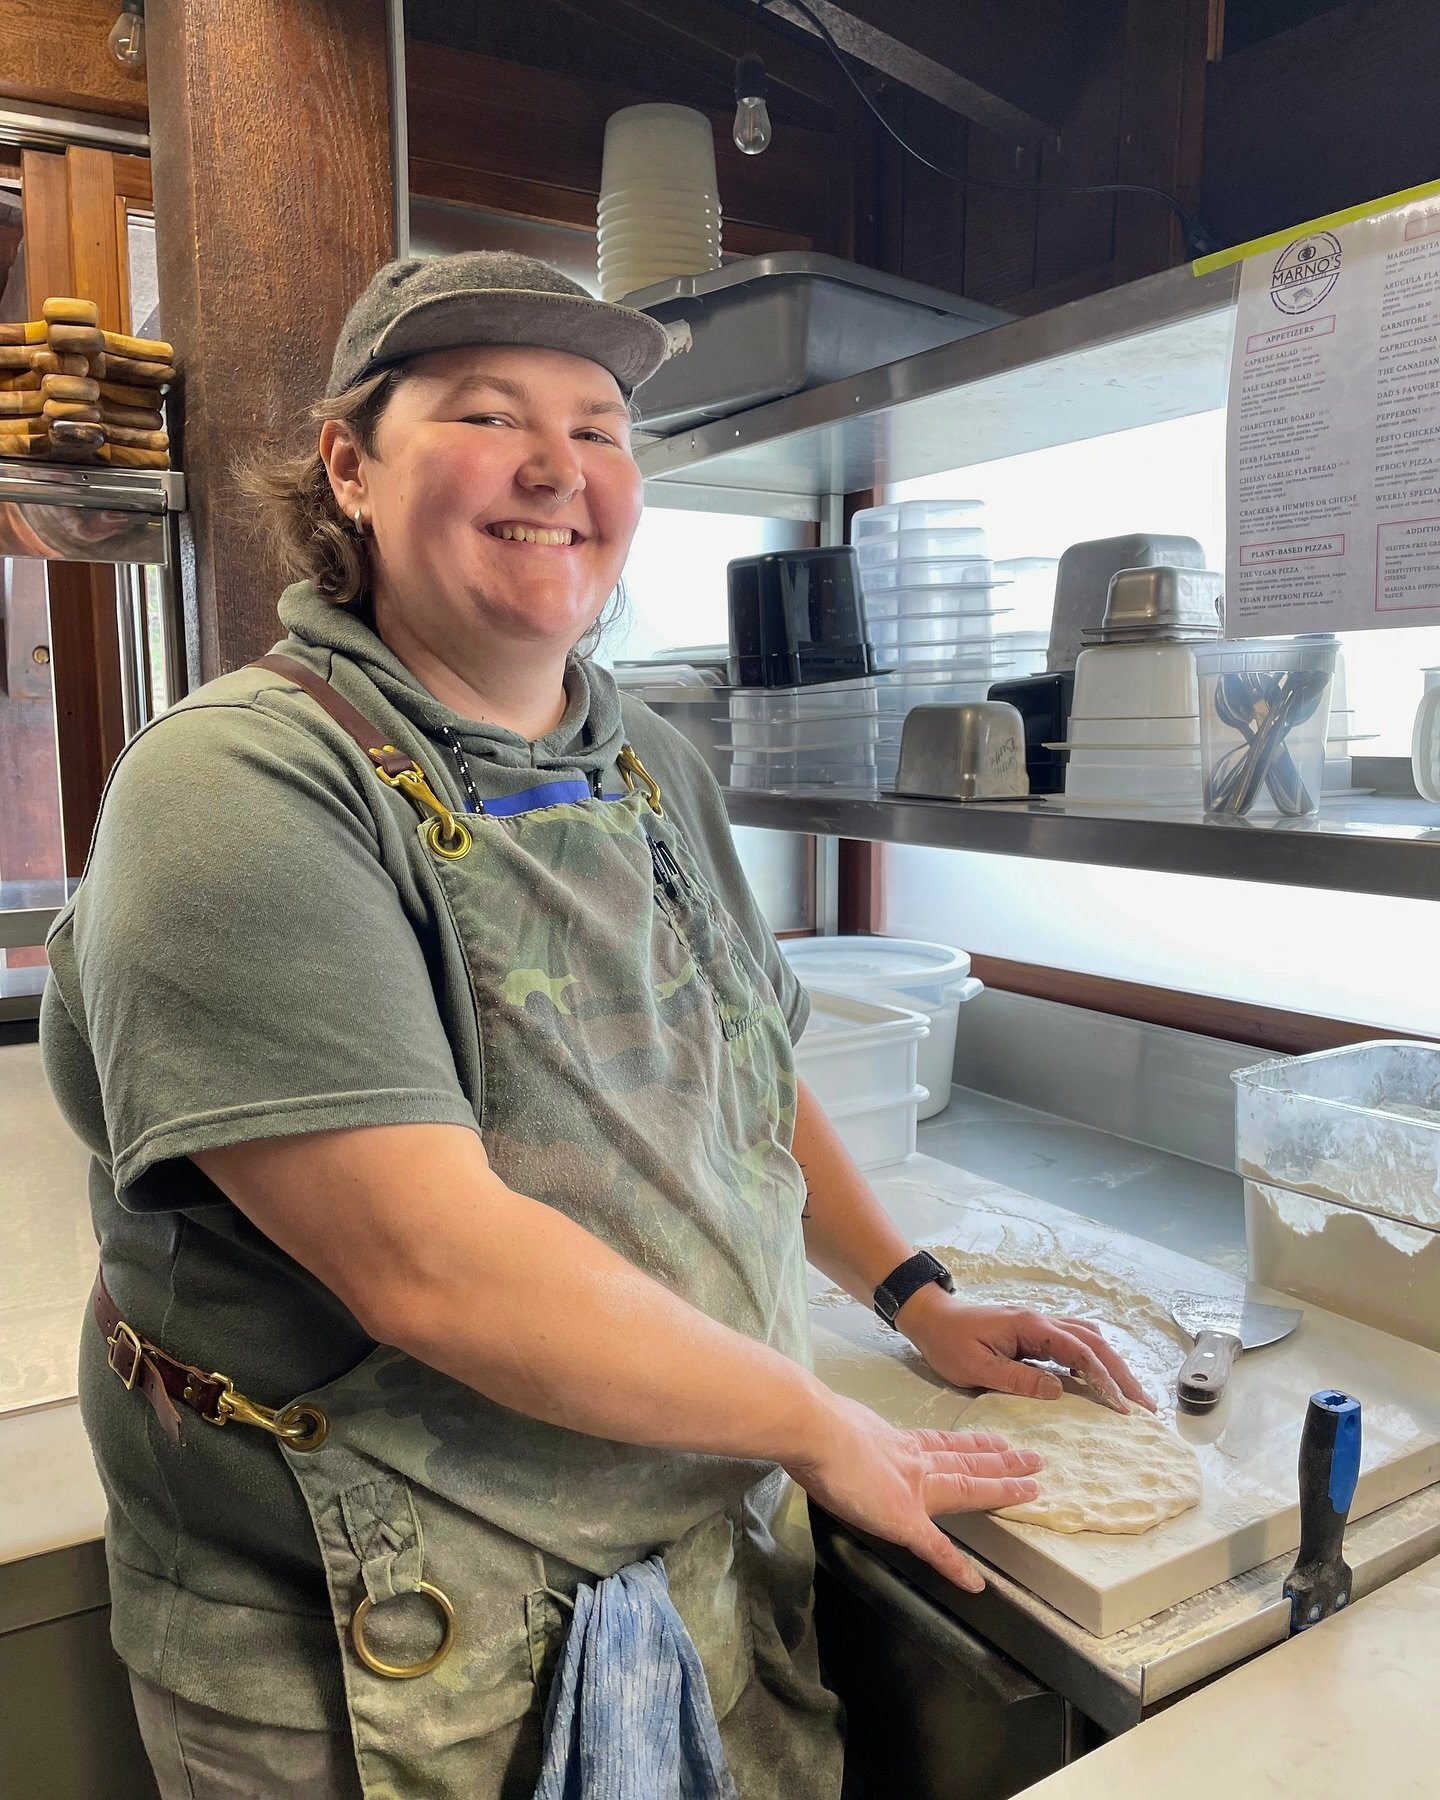 Meet Chef Morgen, the brains and talent behind the incredible Marno&rsquo;s Woodfire Pizza! 👩🏻&zwj;🍳 

Morgen is a trained chef, a literal pizza genius and one of the nicest people you&rsquo;ll ever meet.  We are so happy to have her back in the k